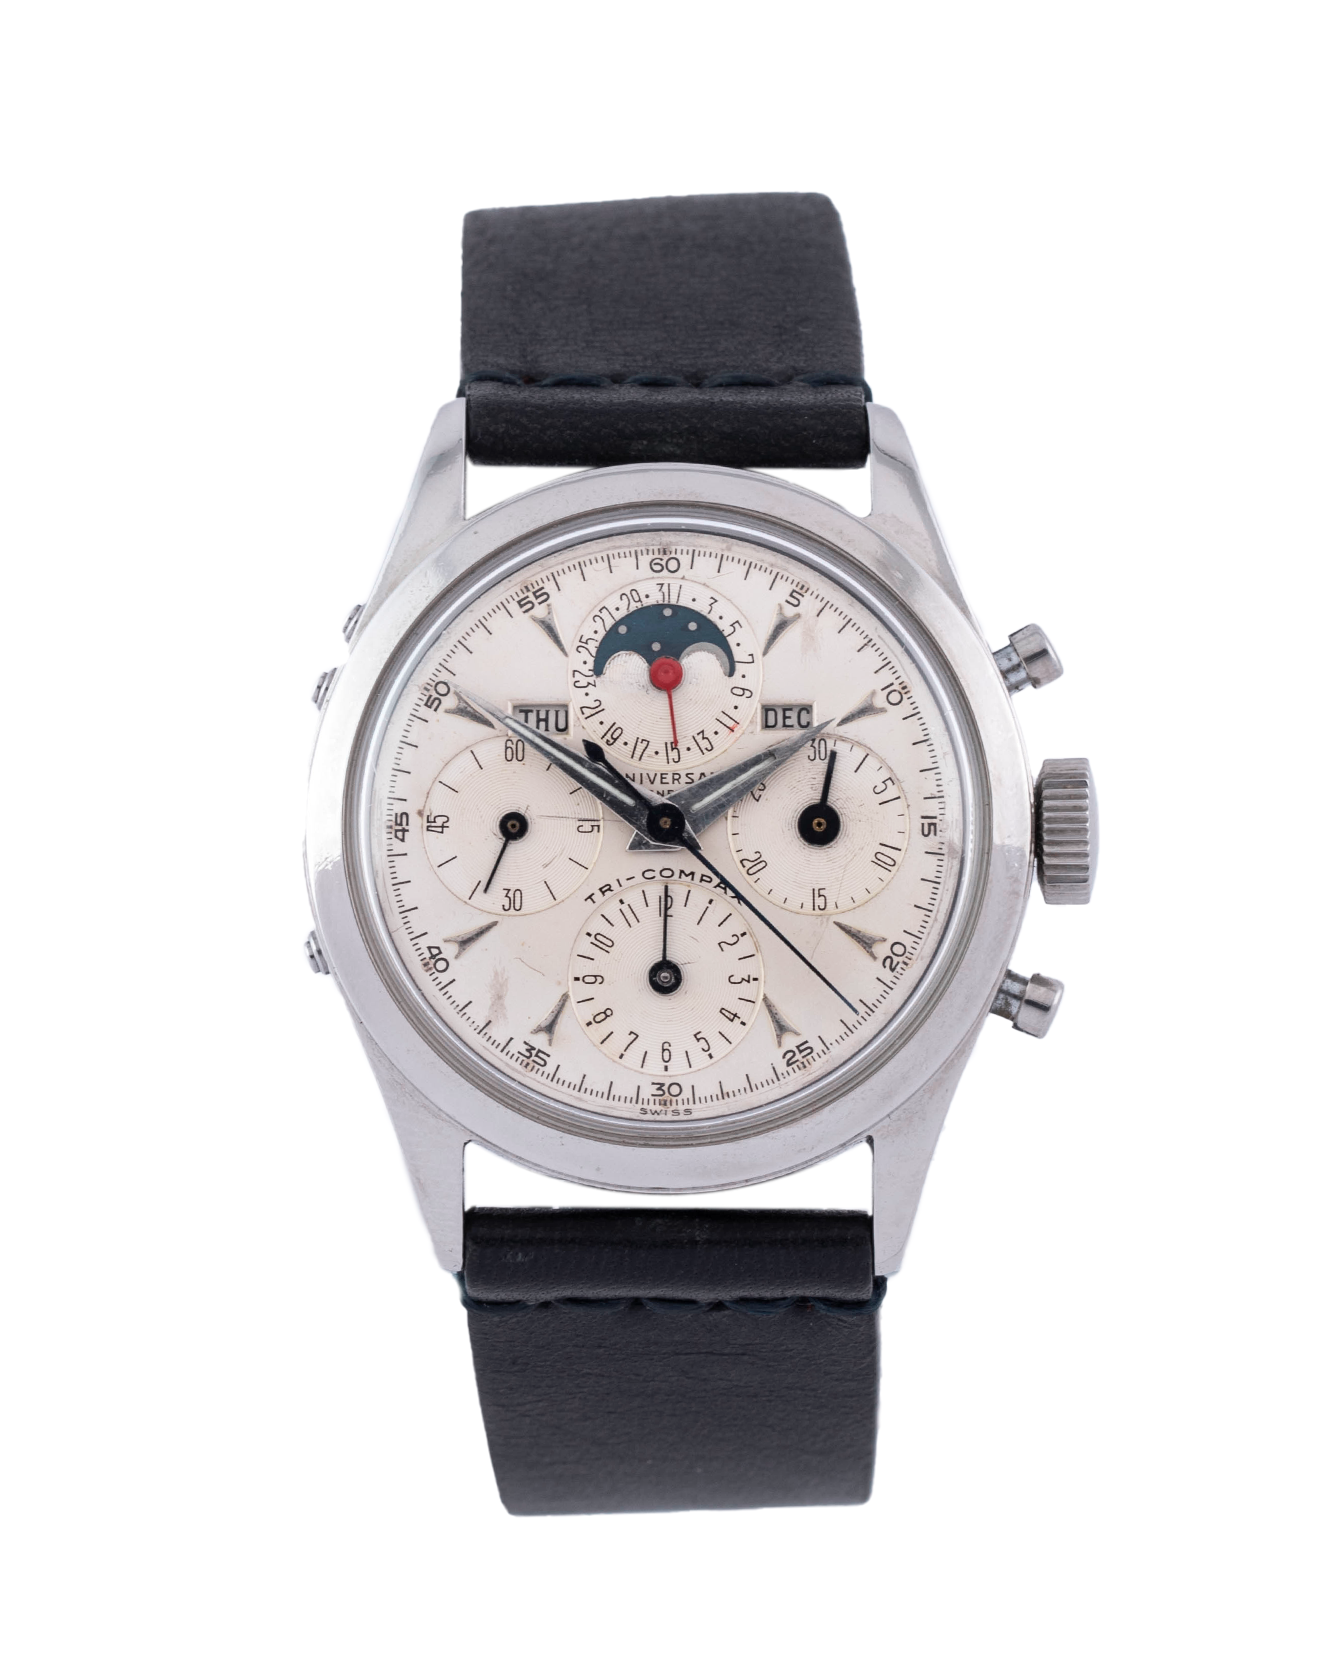 Universal Genève Ref. 22297 Tri Compax Rounded Pushers "spillino" in stainless steel woth white dial 